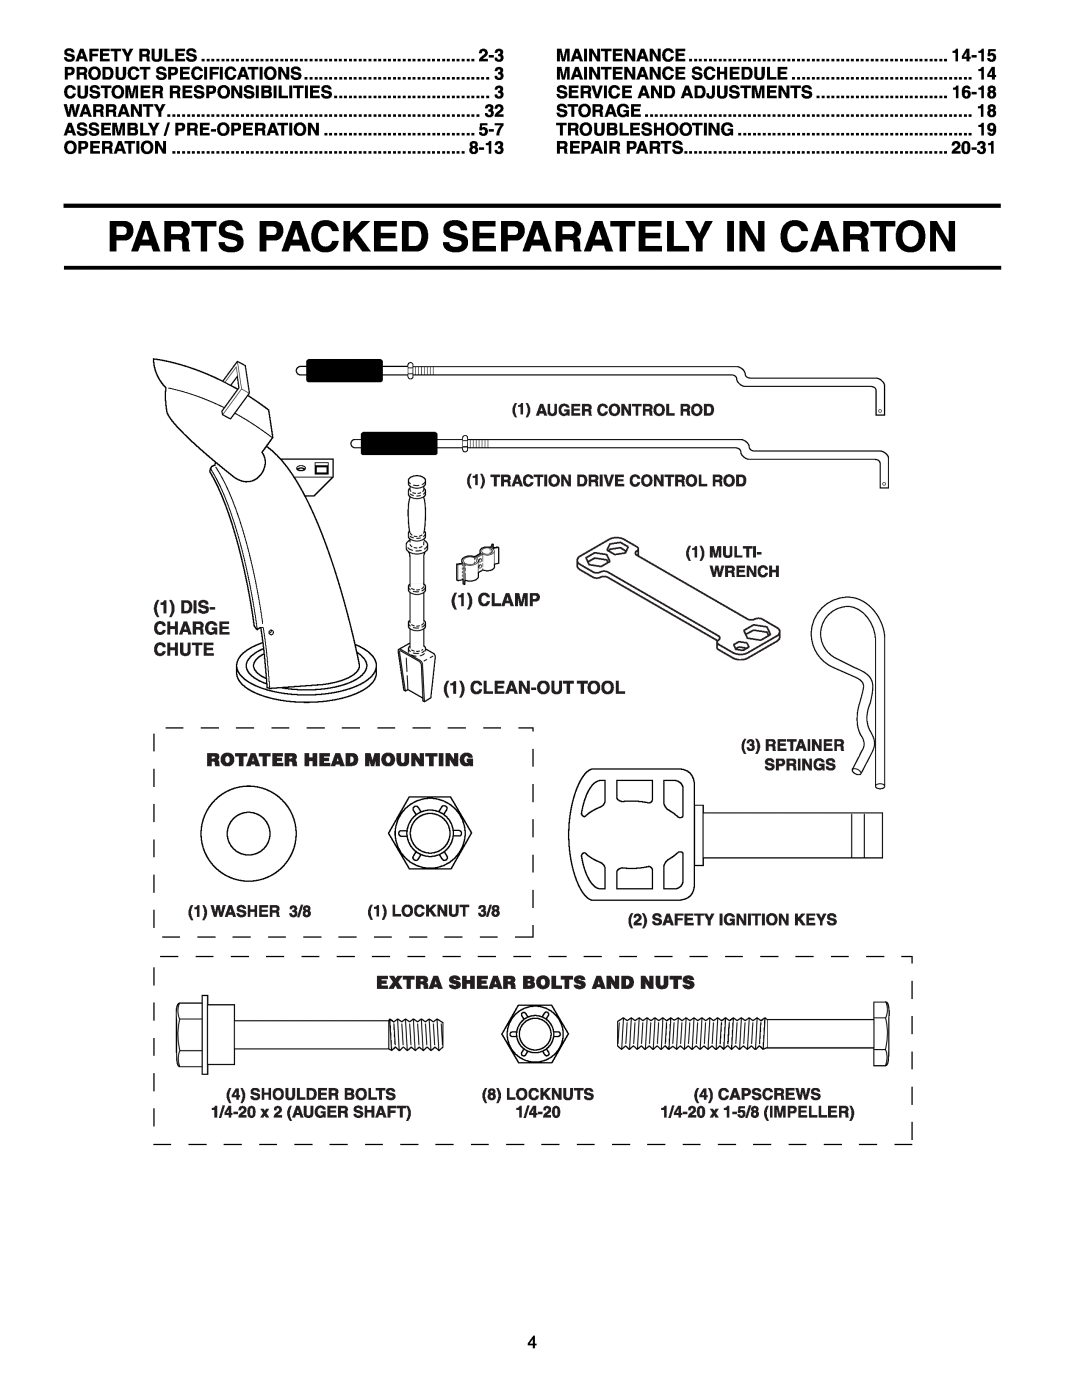 Poulan 192034 owner manual Parts Packed Separately In Carton, 8-13, 14-15, Service And Adjustments, 16-18, 20-31 